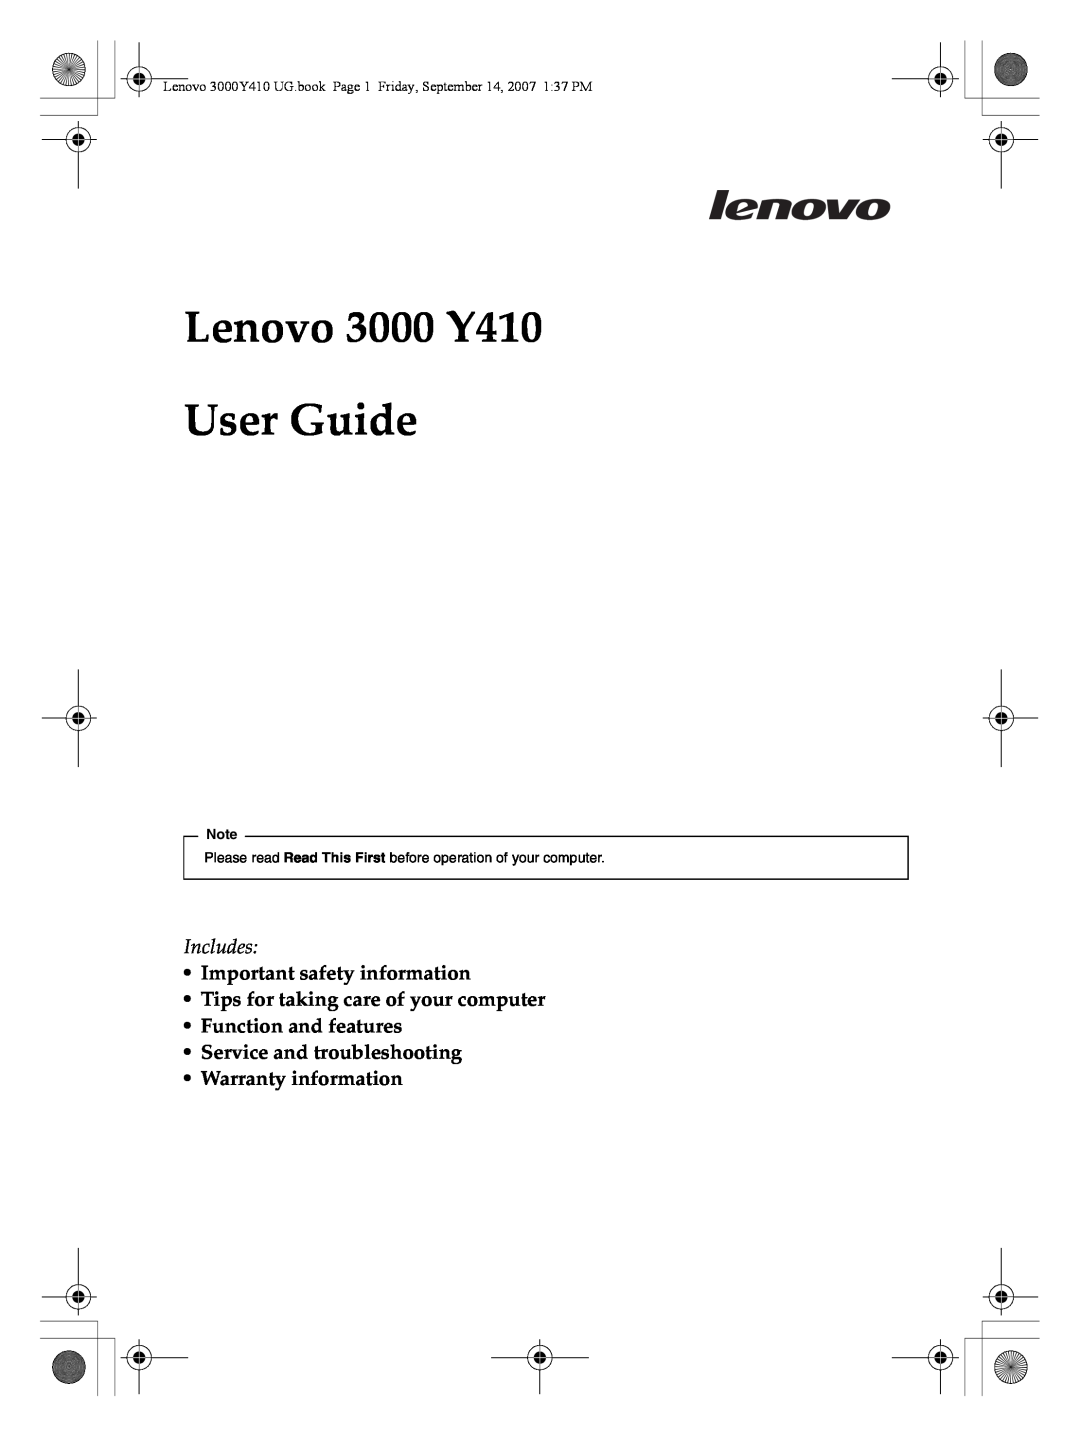 Lenovo 3000 Y410 warranty •Important safety information, •Tips for taking care of your computer, •Function and features 